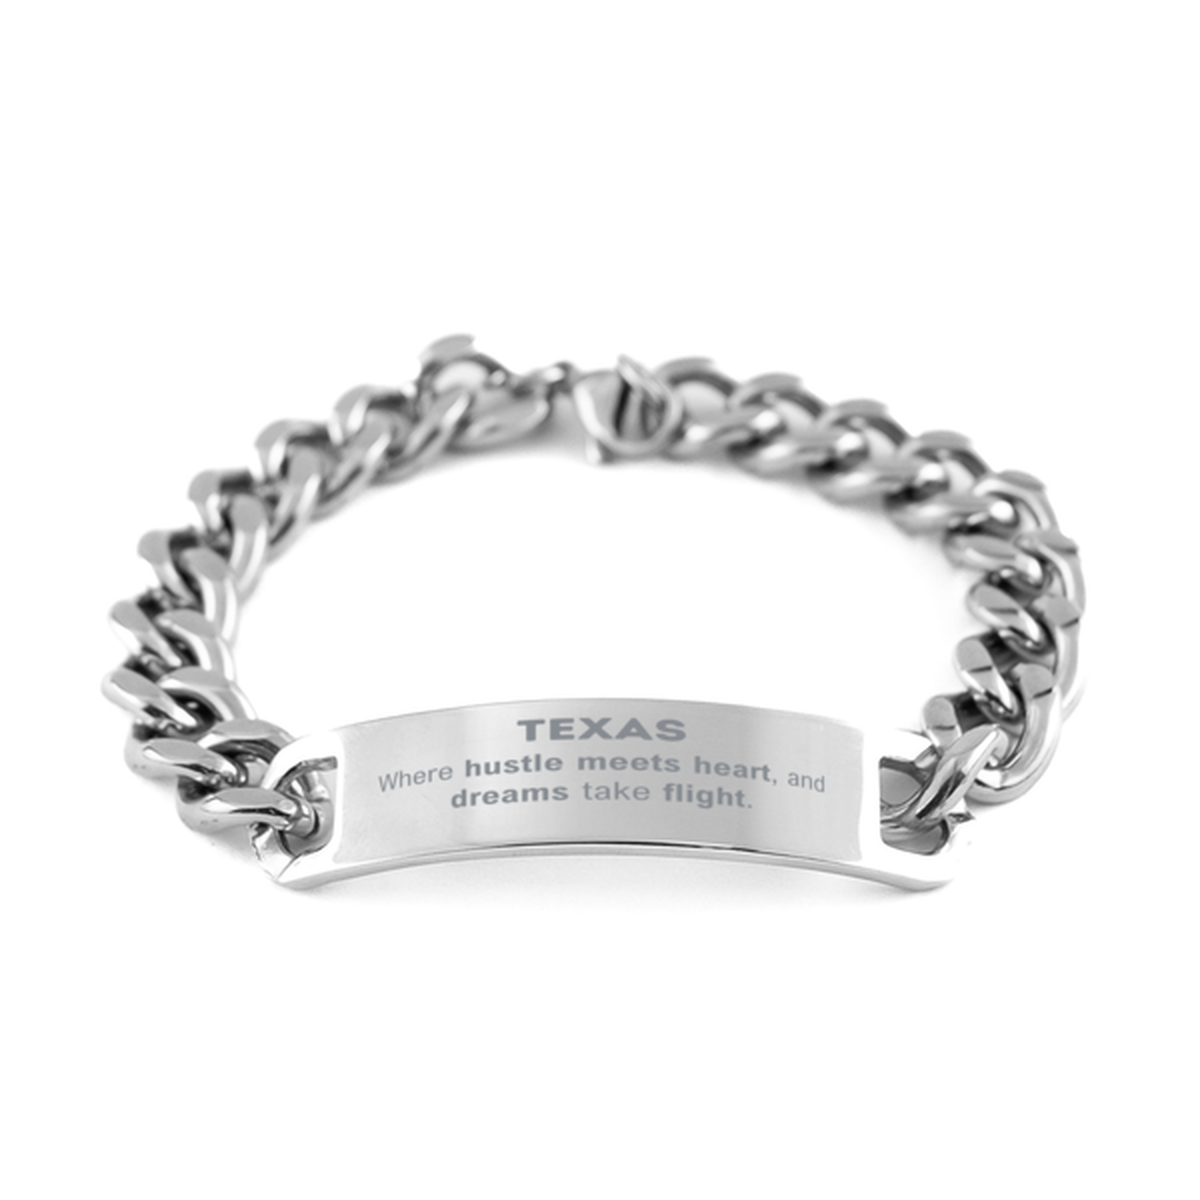 Texas: Where hustle meets heart, and dreams take flight, Texas Gifts, Proud Texas Christmas Birthday Texas Cuban Chain Stainless Steel Bracelet, Texas State People, Men, Women, Friends